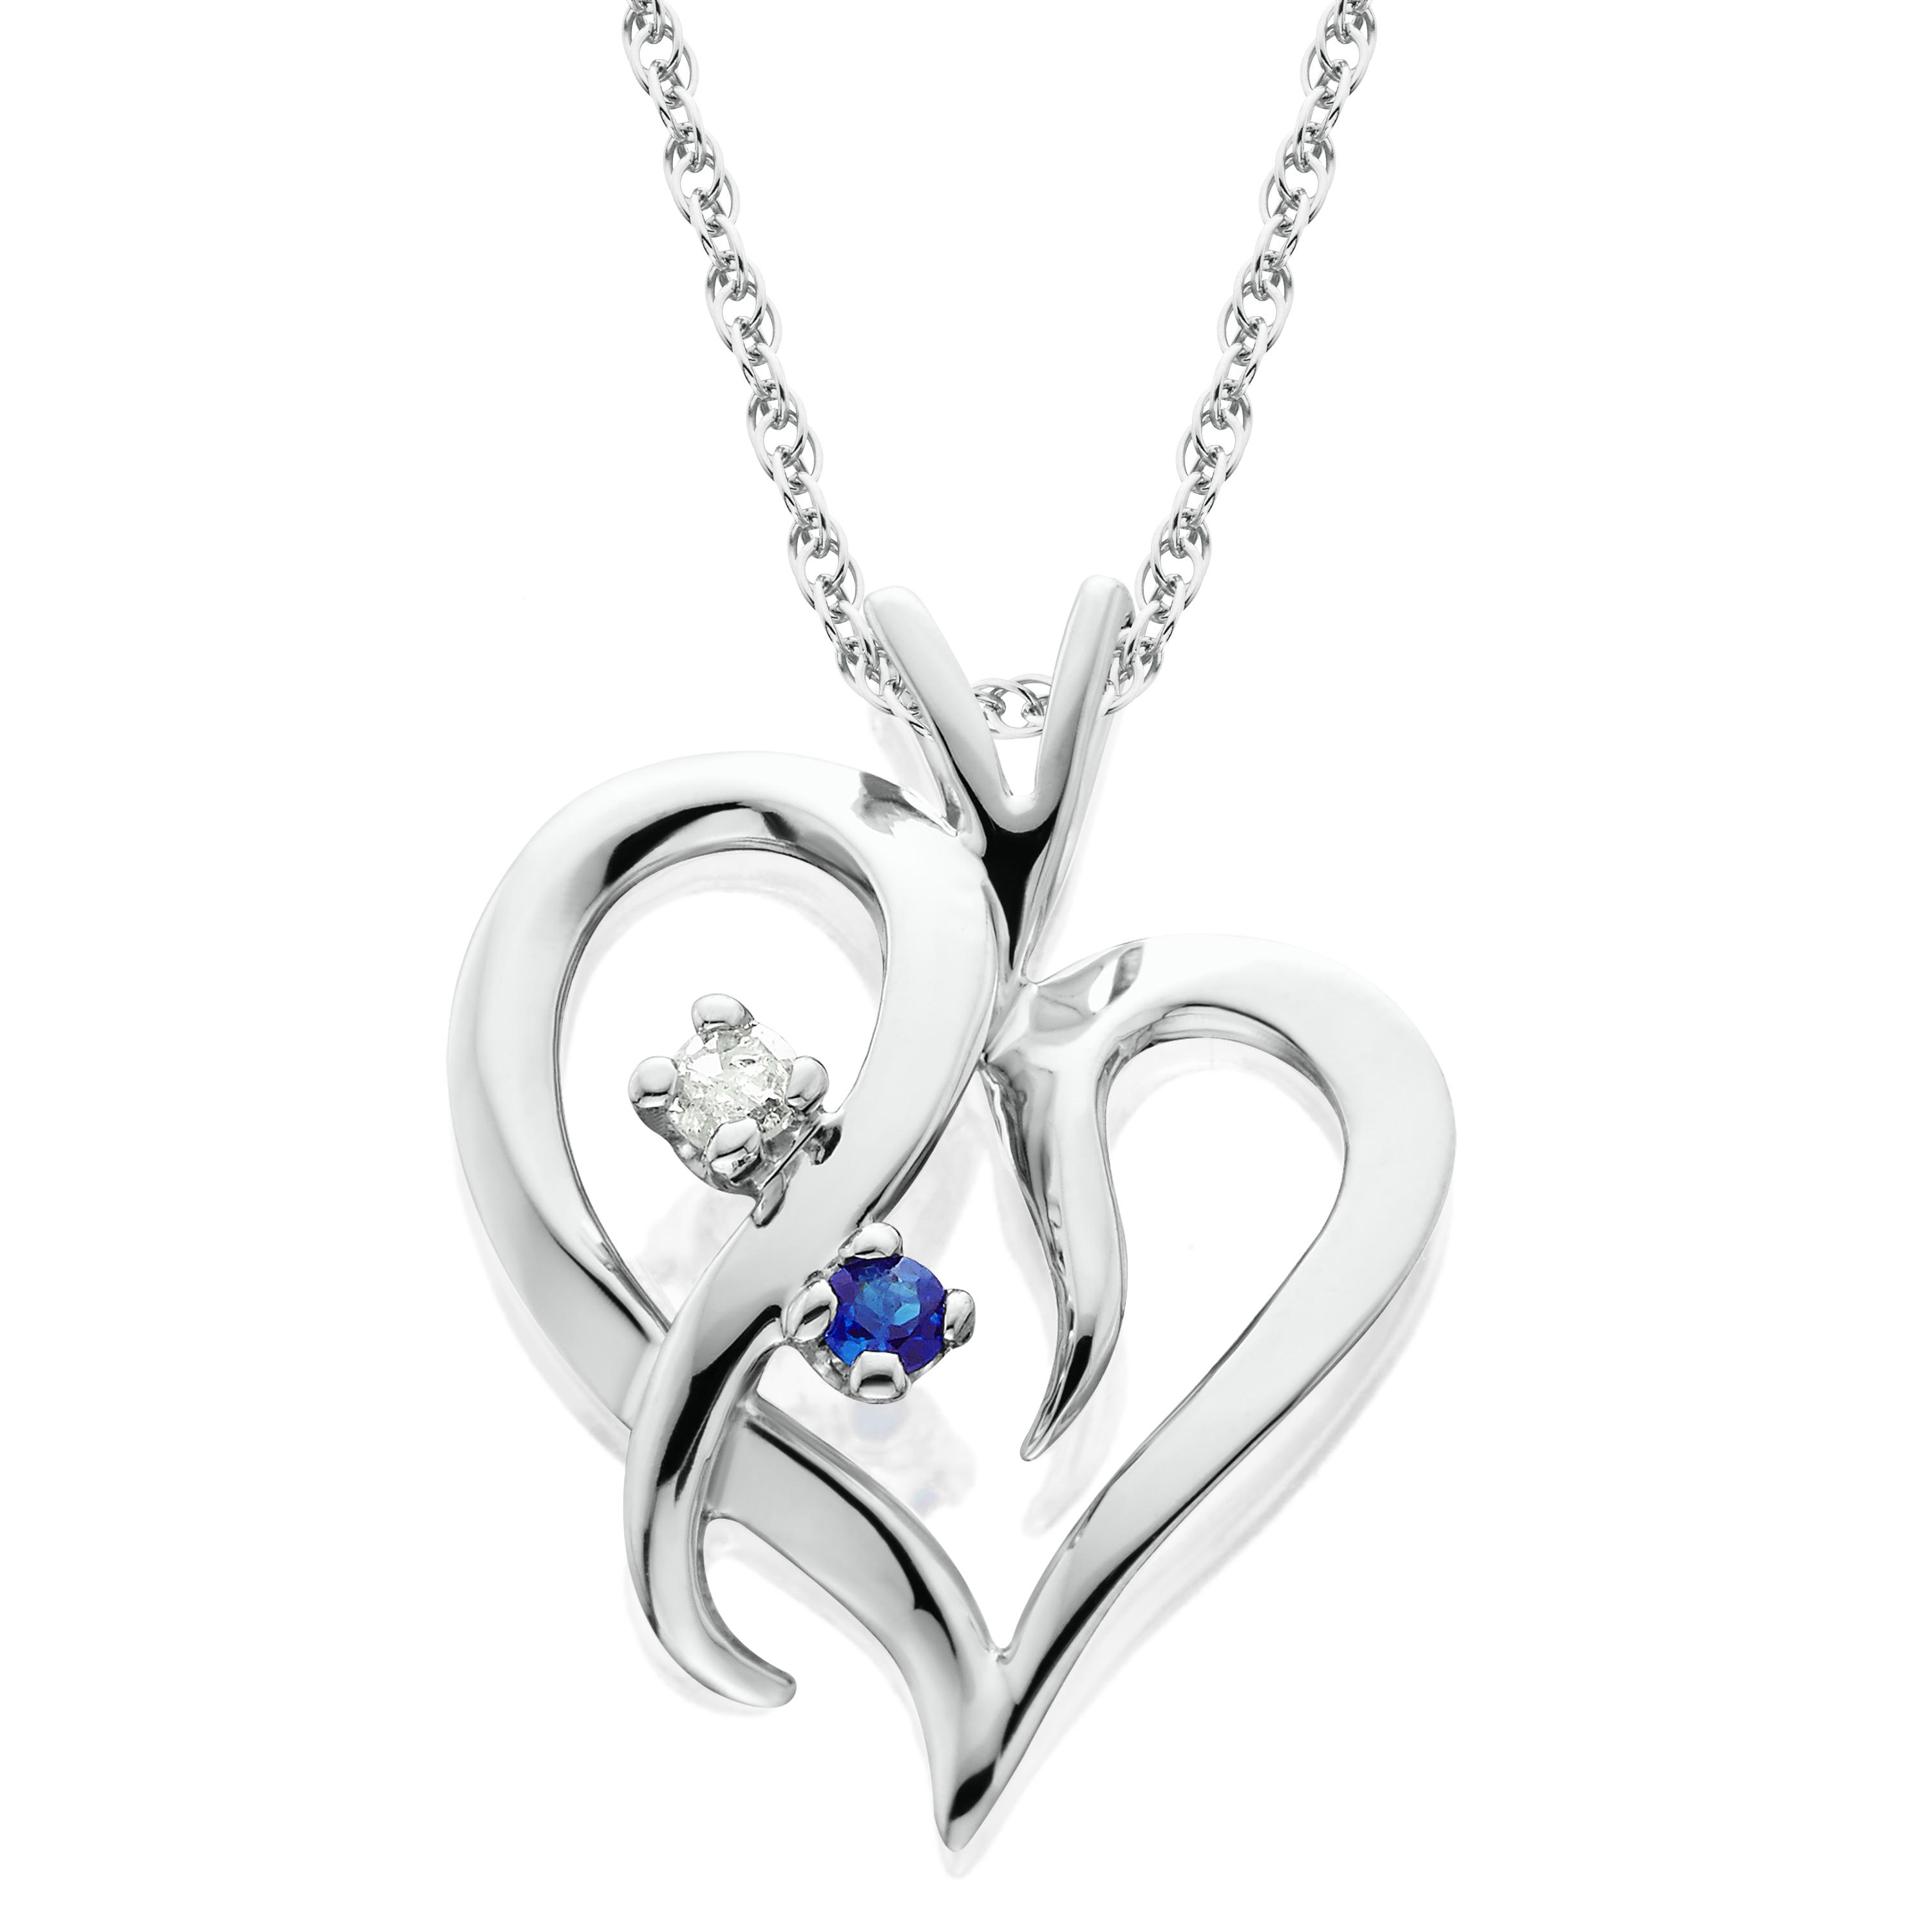 Details about   Blue Sapphire & Diamond Heart Pendant Necklace 14K Rose Gold Over Sterling 18"